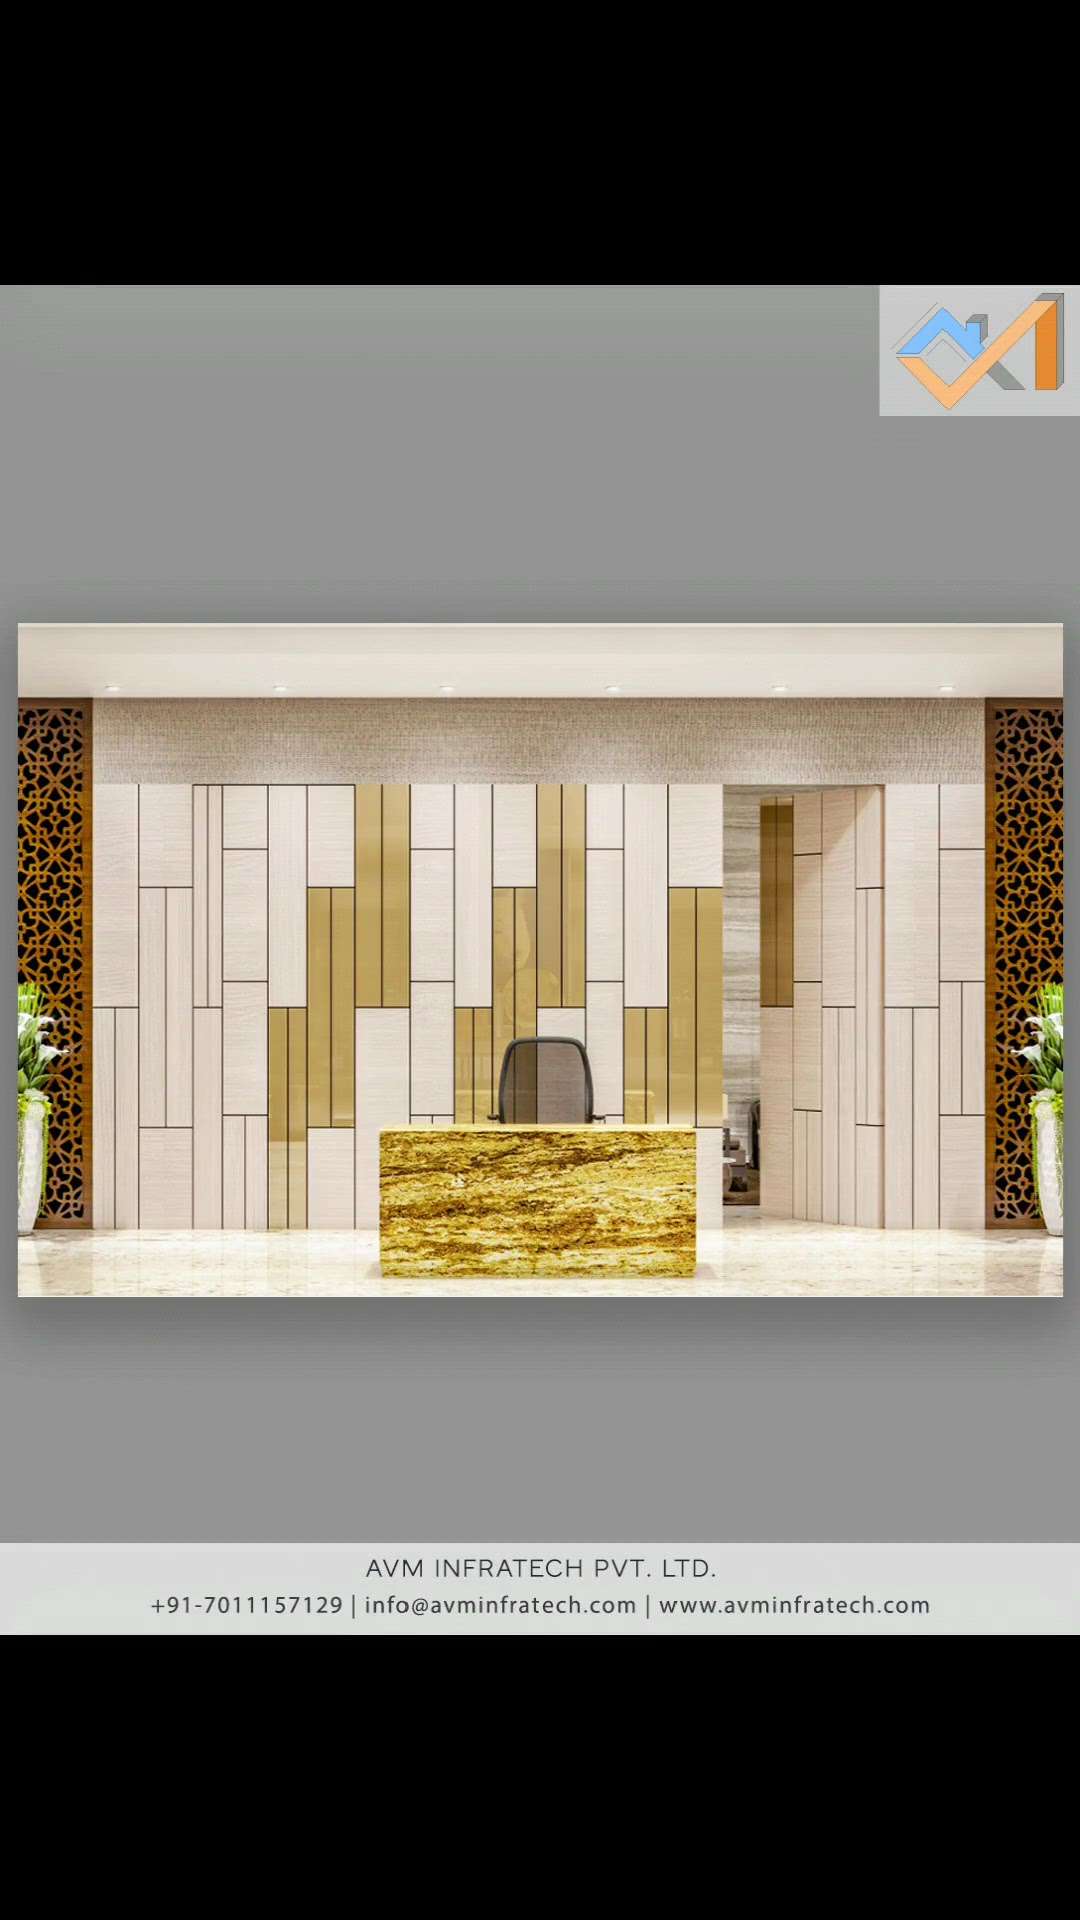 It’s one thing to greet office visitors and make them feel welcome, it’s another to make them feel welcomed as soon as they step into your office. With the “Perfect” Front Office Reception design, you have the power to control the latter.


Follow us for more such amazing updates. 
.
.
#reception #frontoffice #front #office #officedesign #officeinterior #commercial #receptionlook #receptiondecor #design #designinterior #interiordesign #avminfratech #aesthetic #idea #decor #decoration #receptiondesk #officespace #officefurniture #officegoals #officeinspiration #officeinteriors